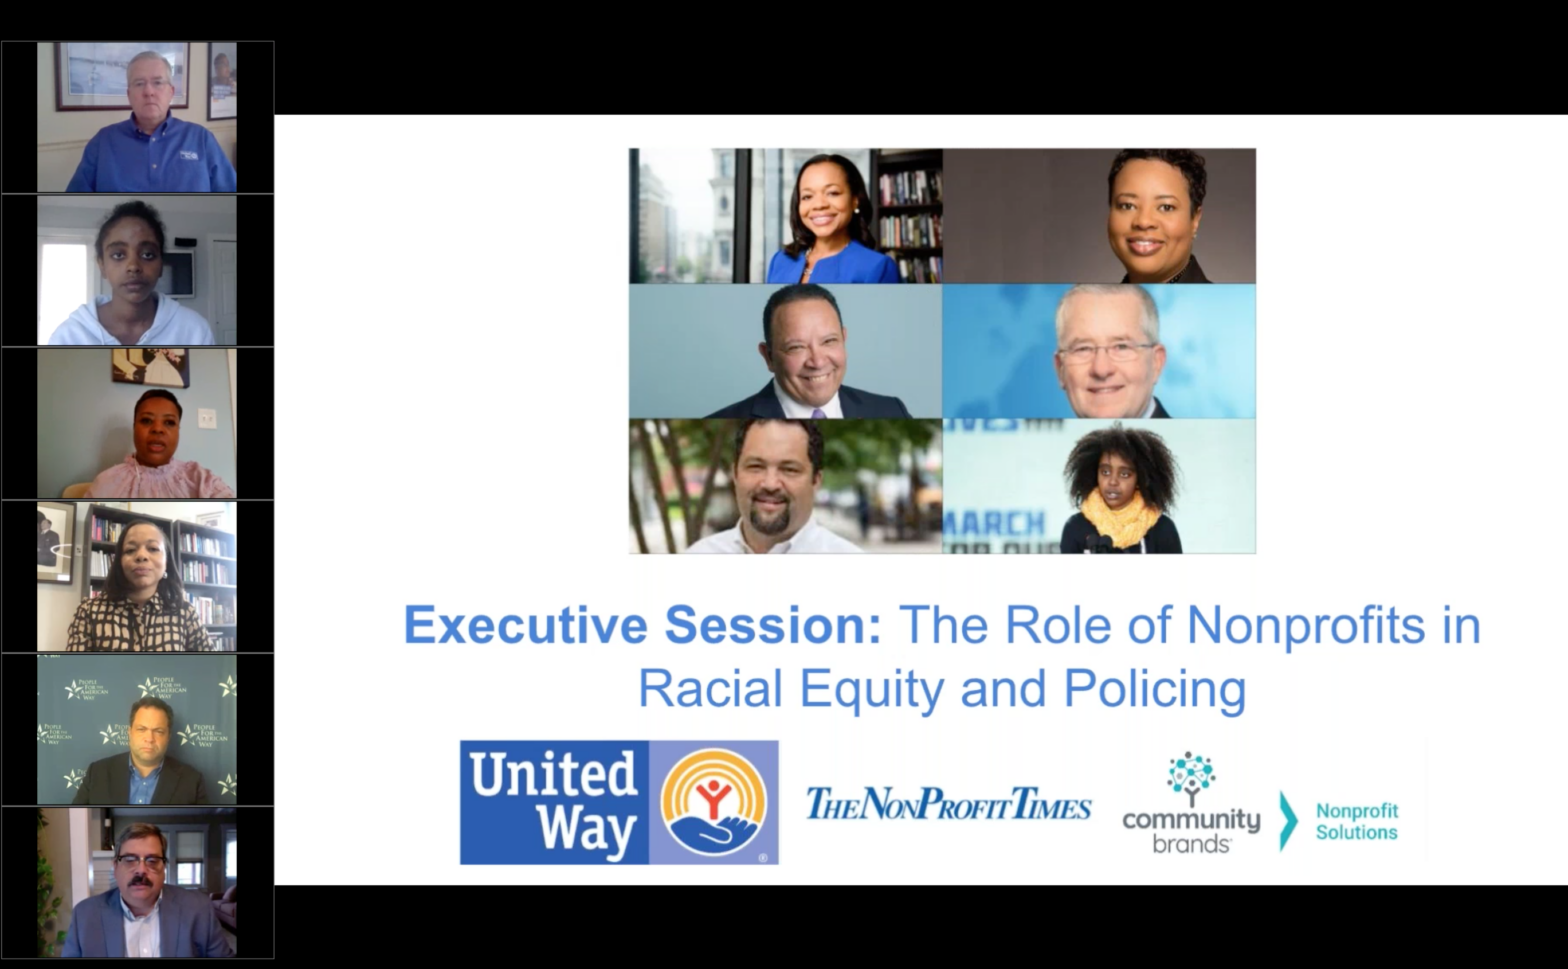 Executive Session: The Role of Nonprofits in Racial Equity and Policing